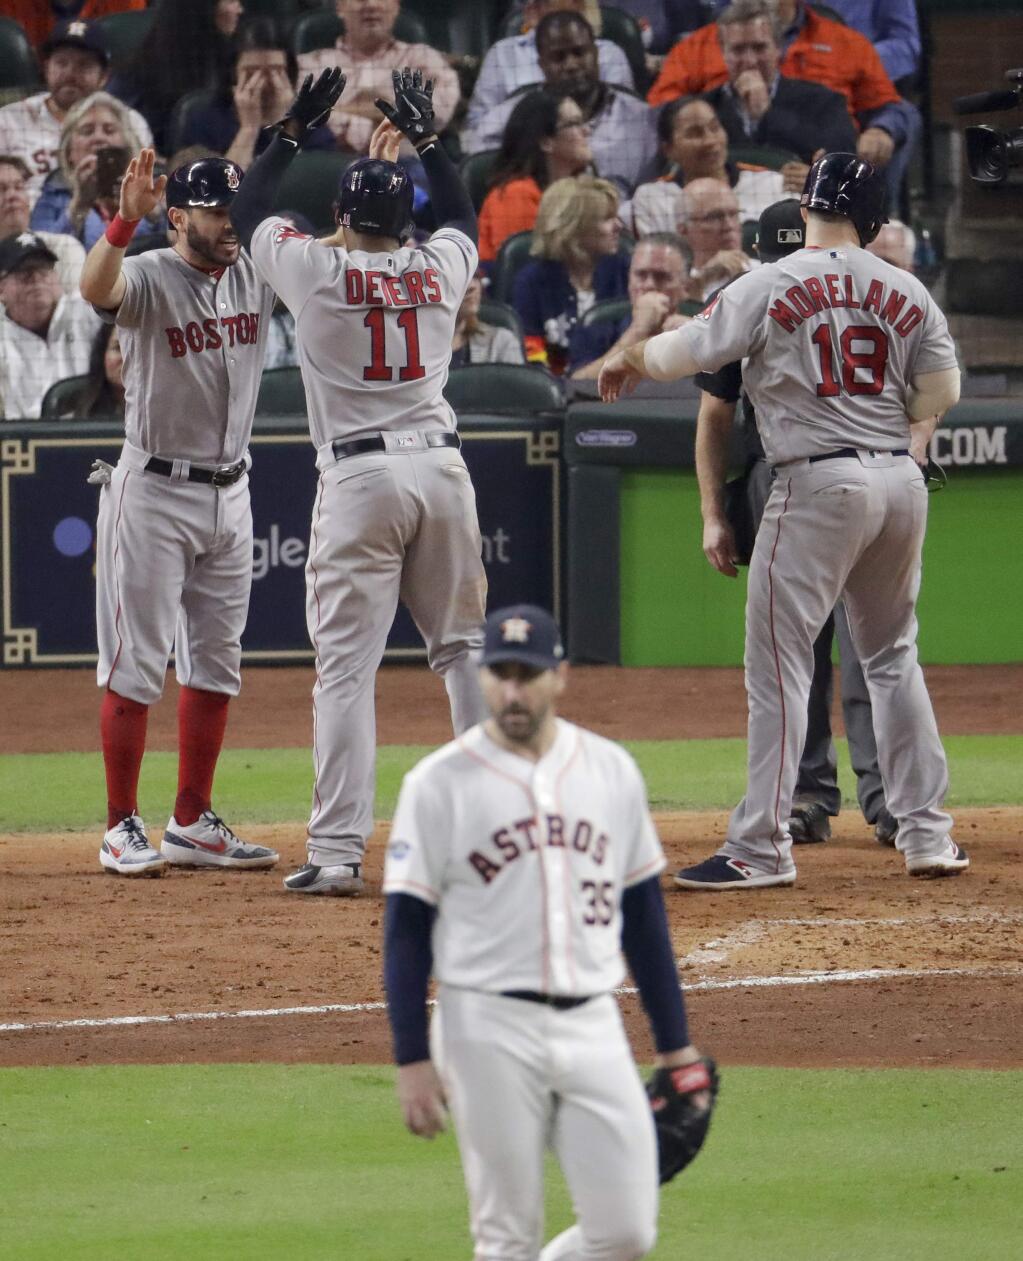 Boston Red Sox's Rafael Devers celebrates his three-run home run off Houston Astros starting pitcher Justin Verlander during the sixth inning in Game 5 of a baseball American League Championship Series on Thursday, Oct. 18, 2018, in Houston.(AP Photo/Lynne Sladky)